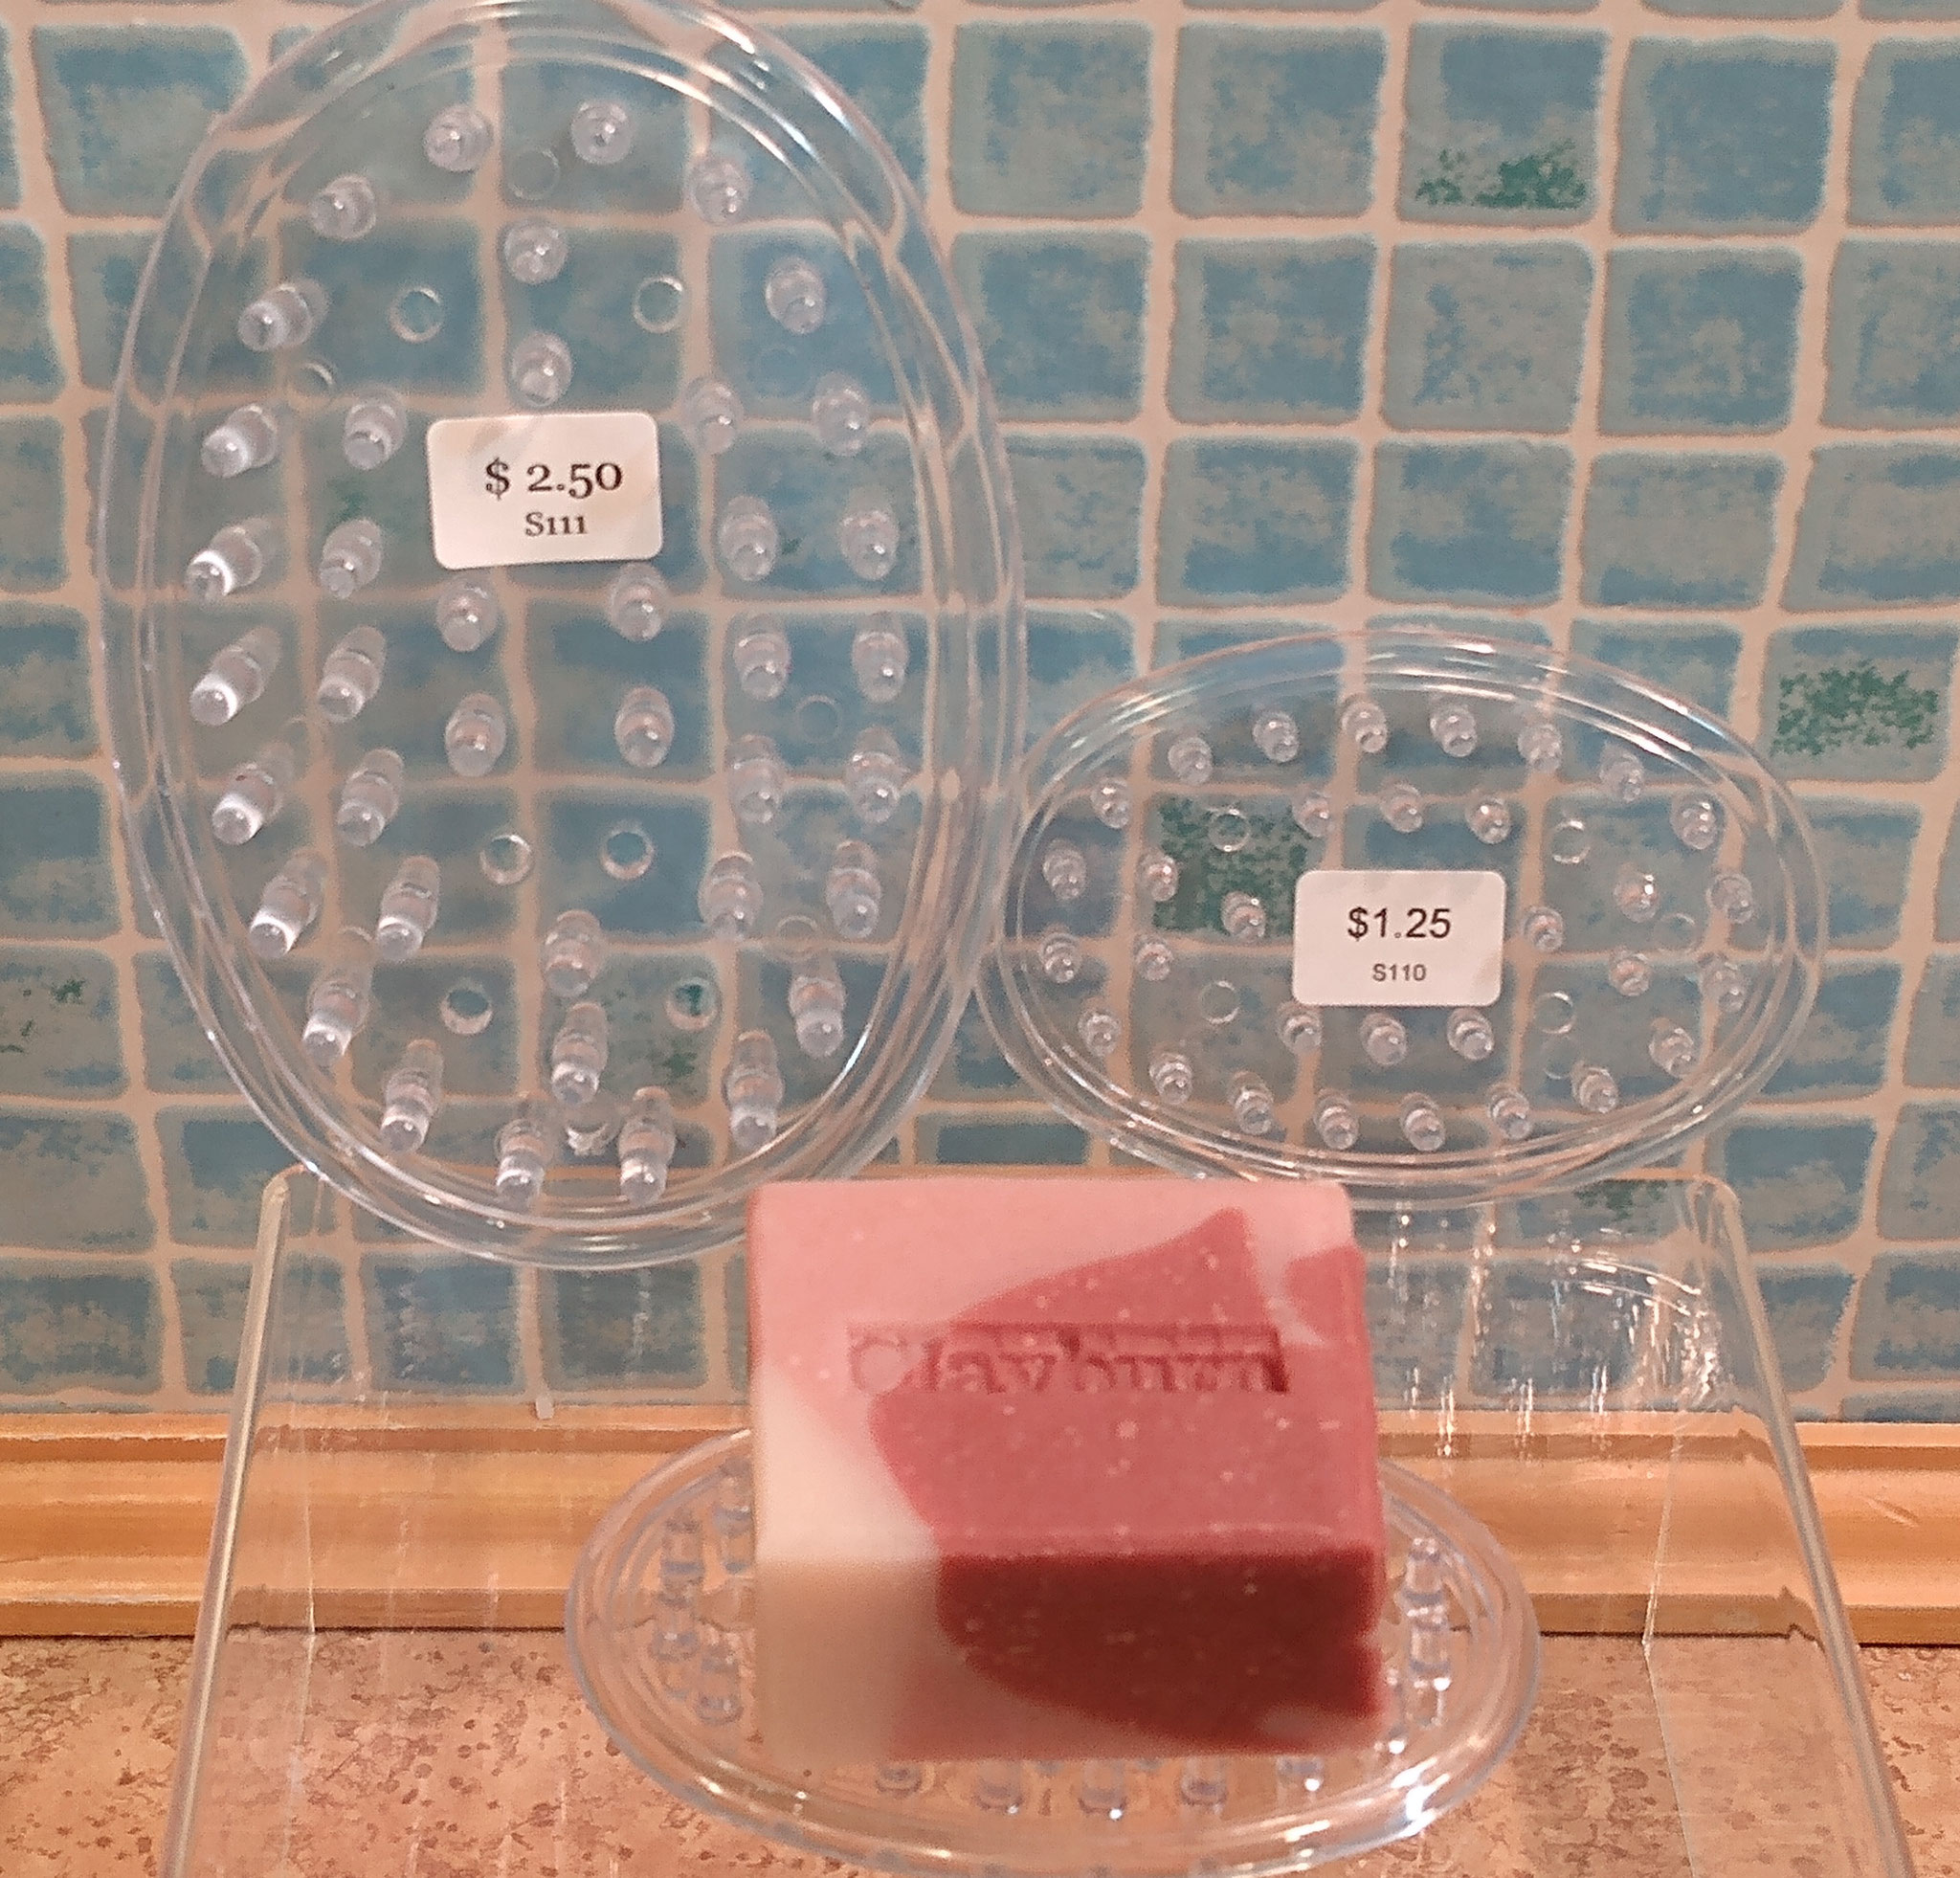 Soap Dishes